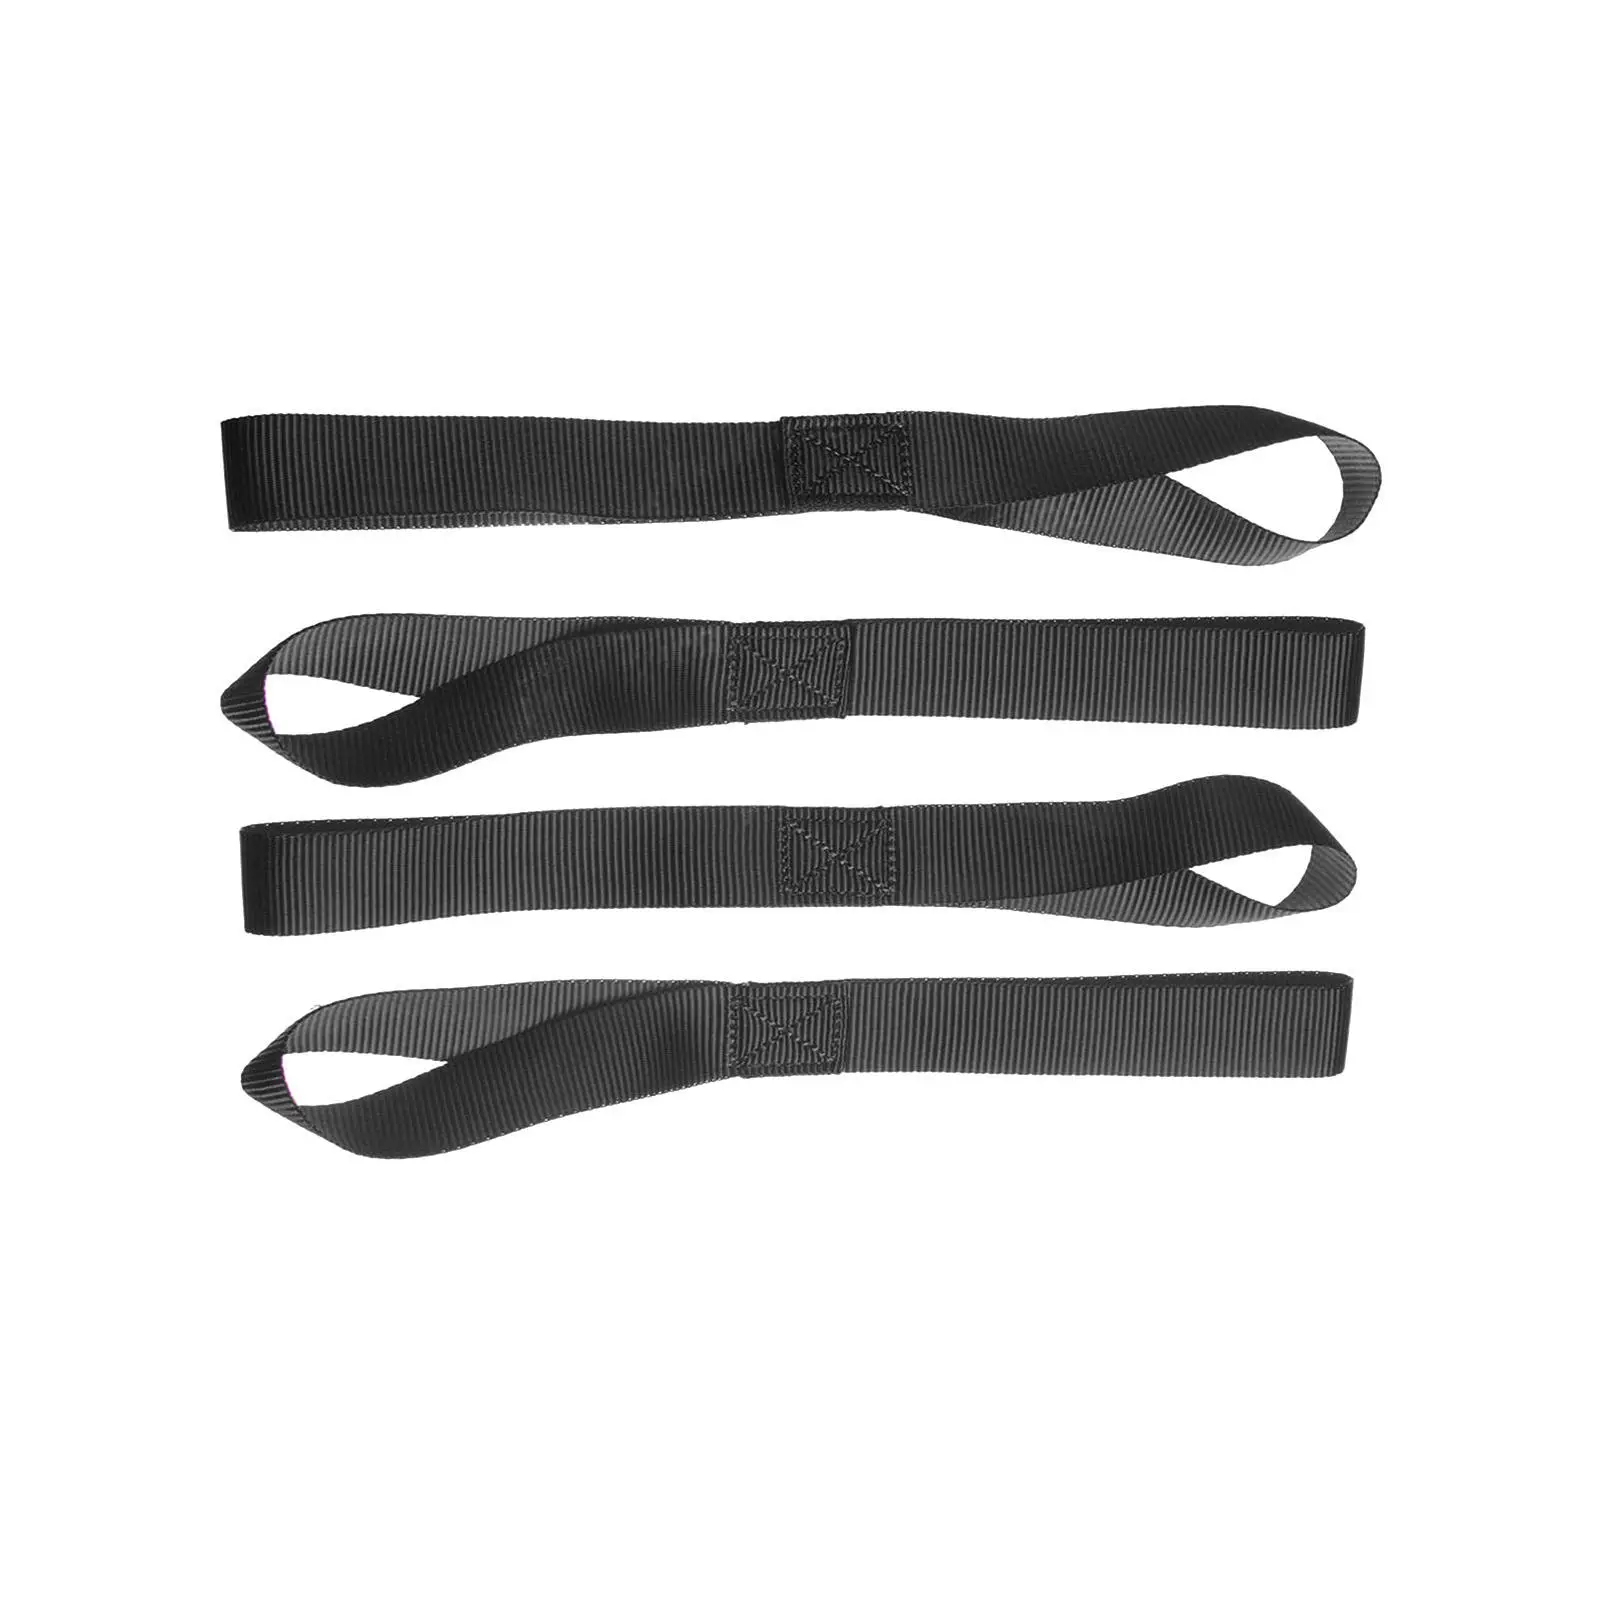 5x Soft Loop for Towing Trailering Reinforced High Strength ATV UTV Lawn Equipment for Motorcycle Bikes Multiple Use Tie Downs